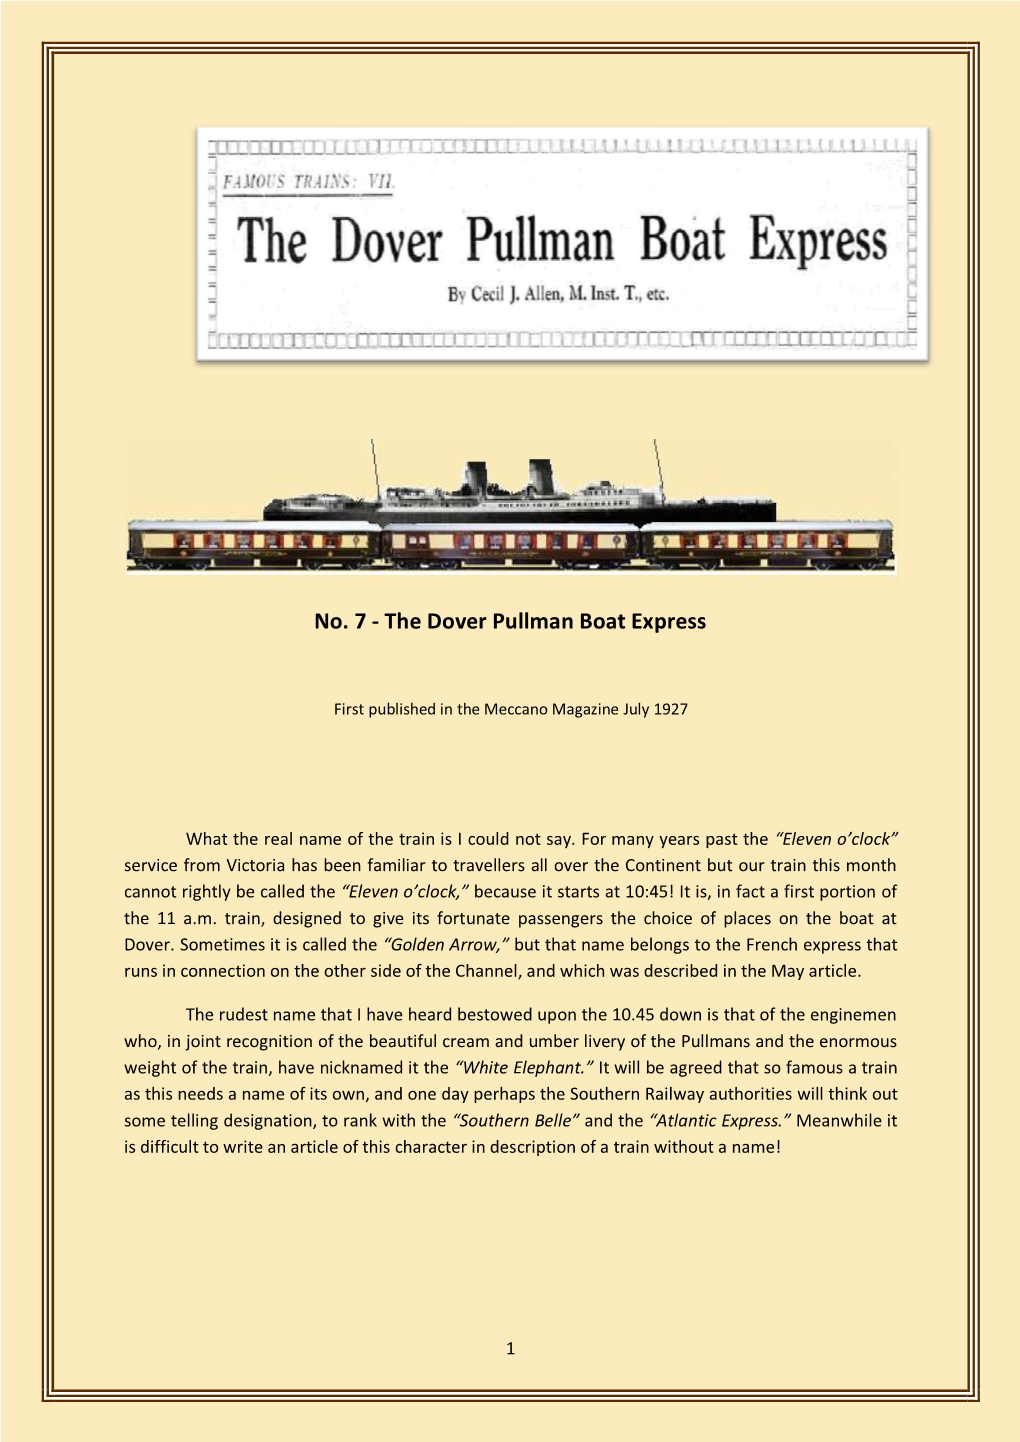 The Dover Pullman Boat Express